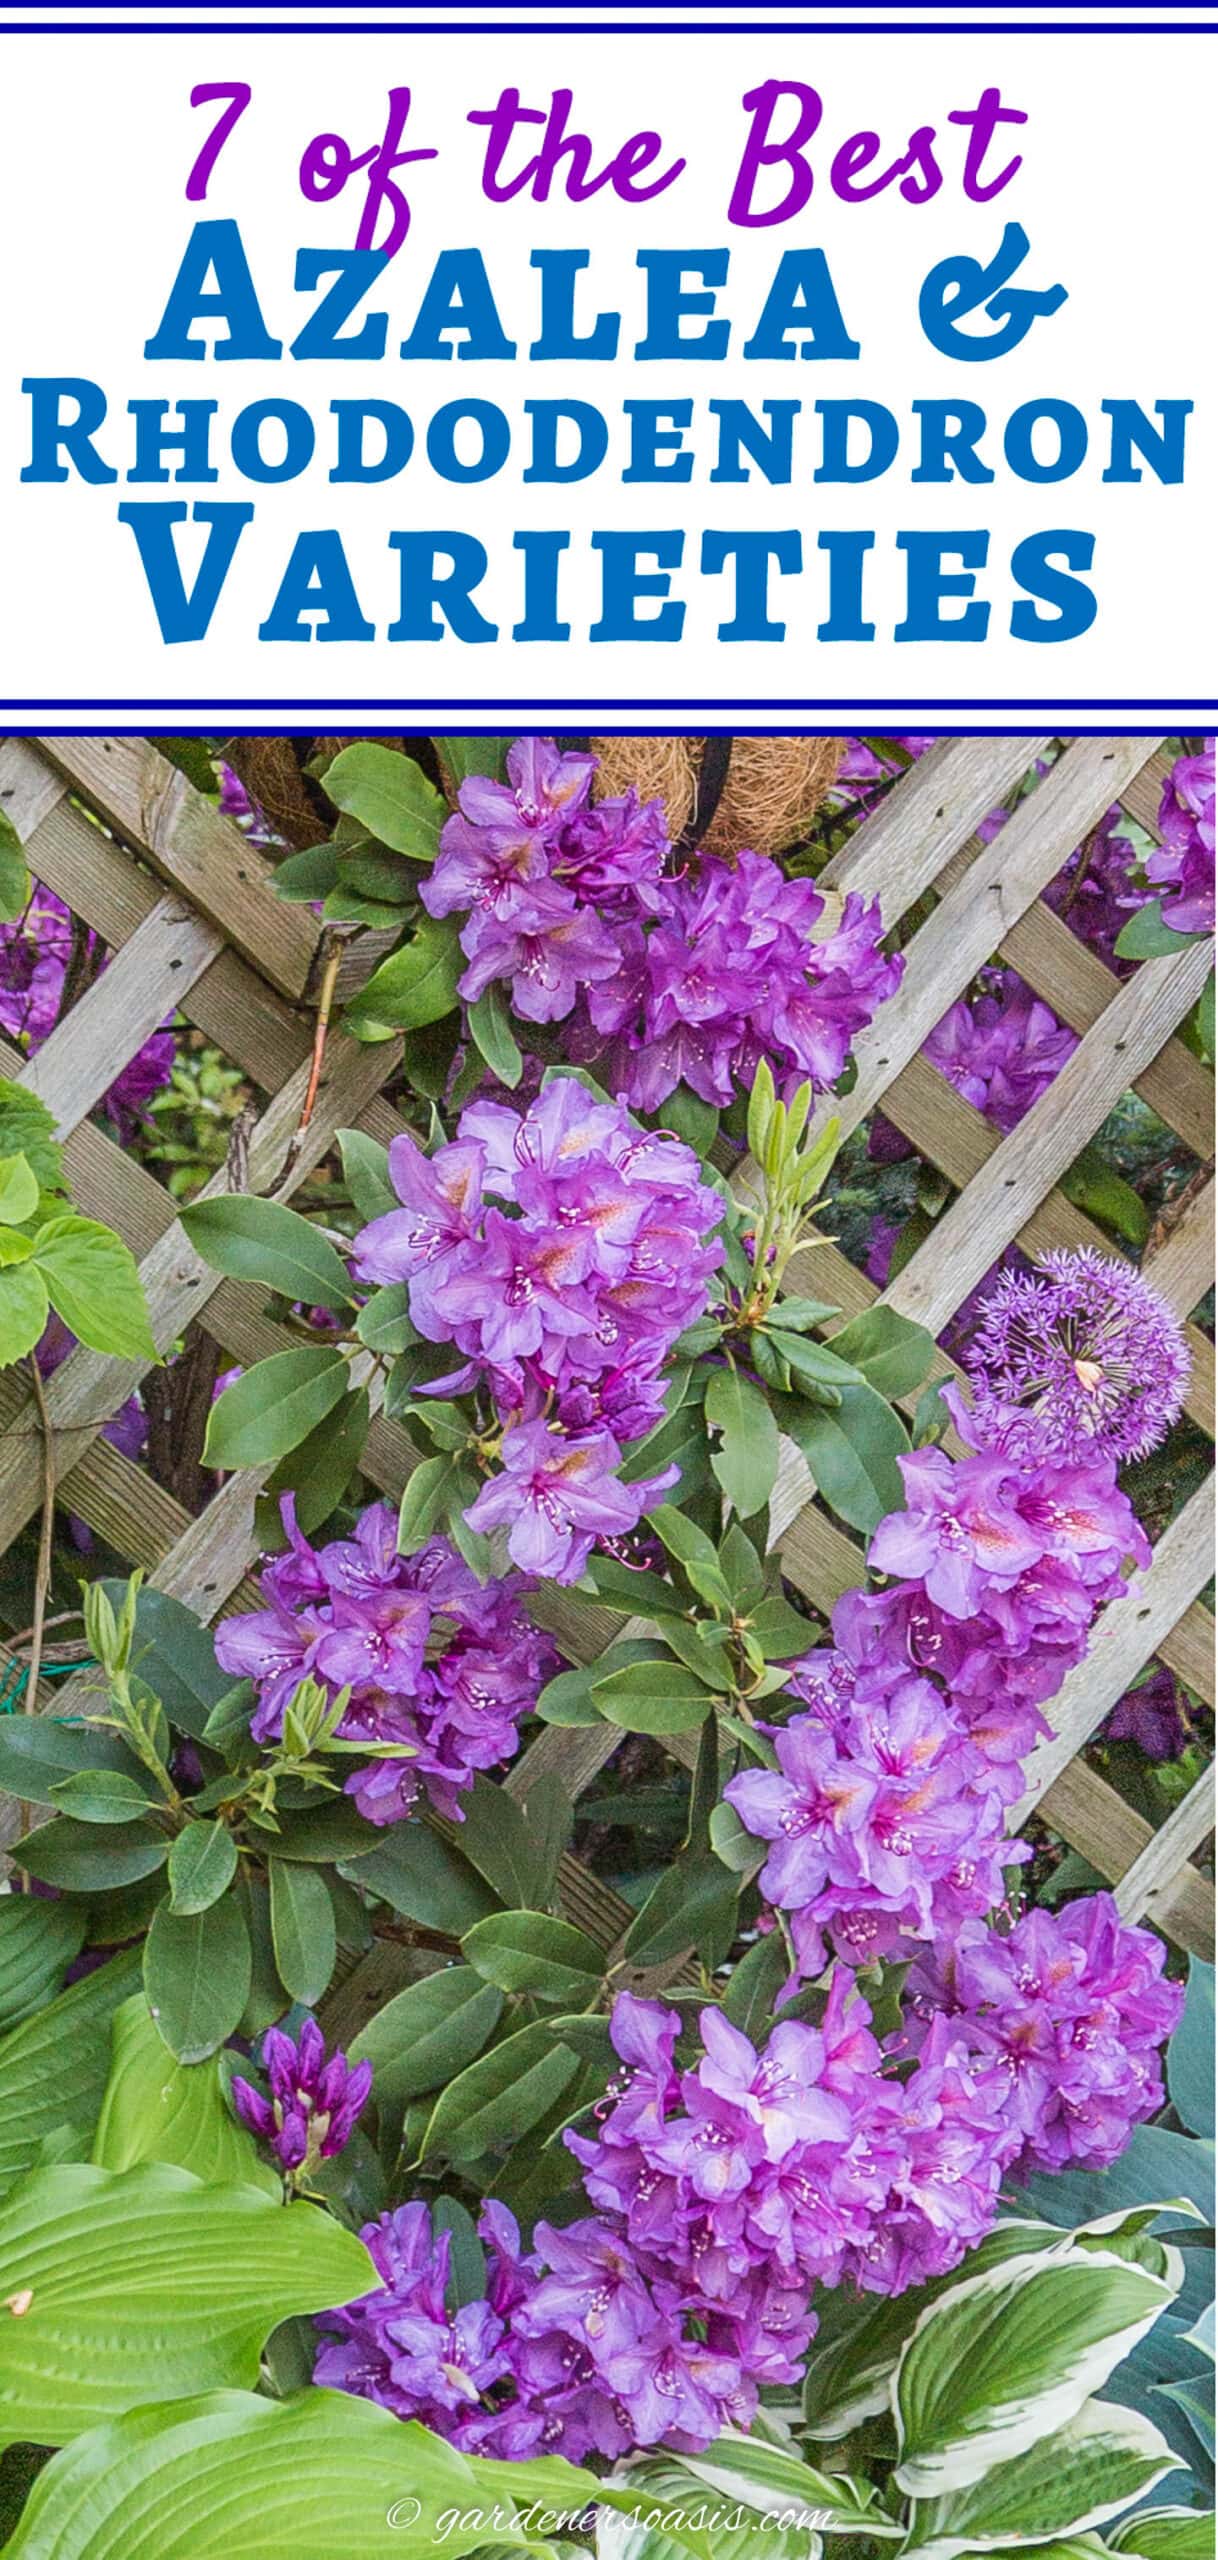 purple-flowered Rhododendron with the text "the best Azalea & Rhododendron varieties" on the top